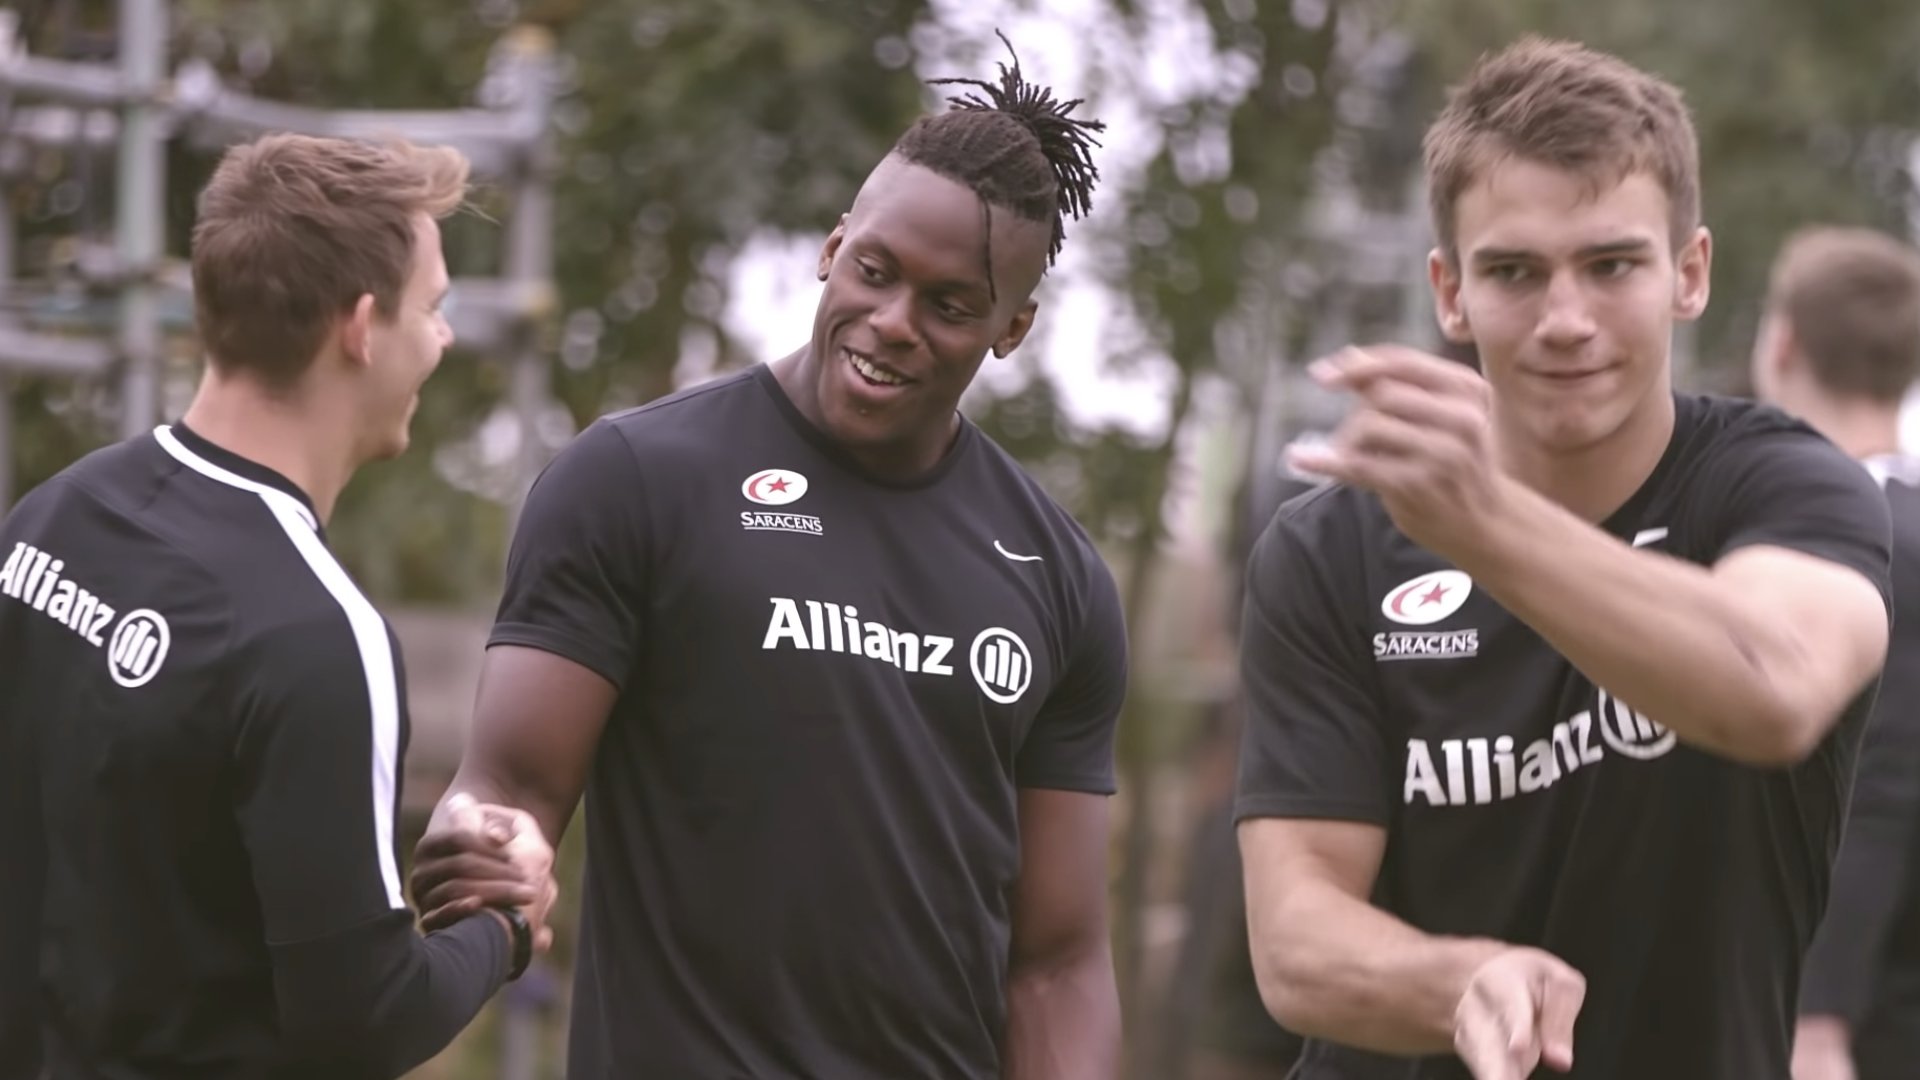 WATCH: New video reveals why Saracens' culture makes them stand out from any other club in England